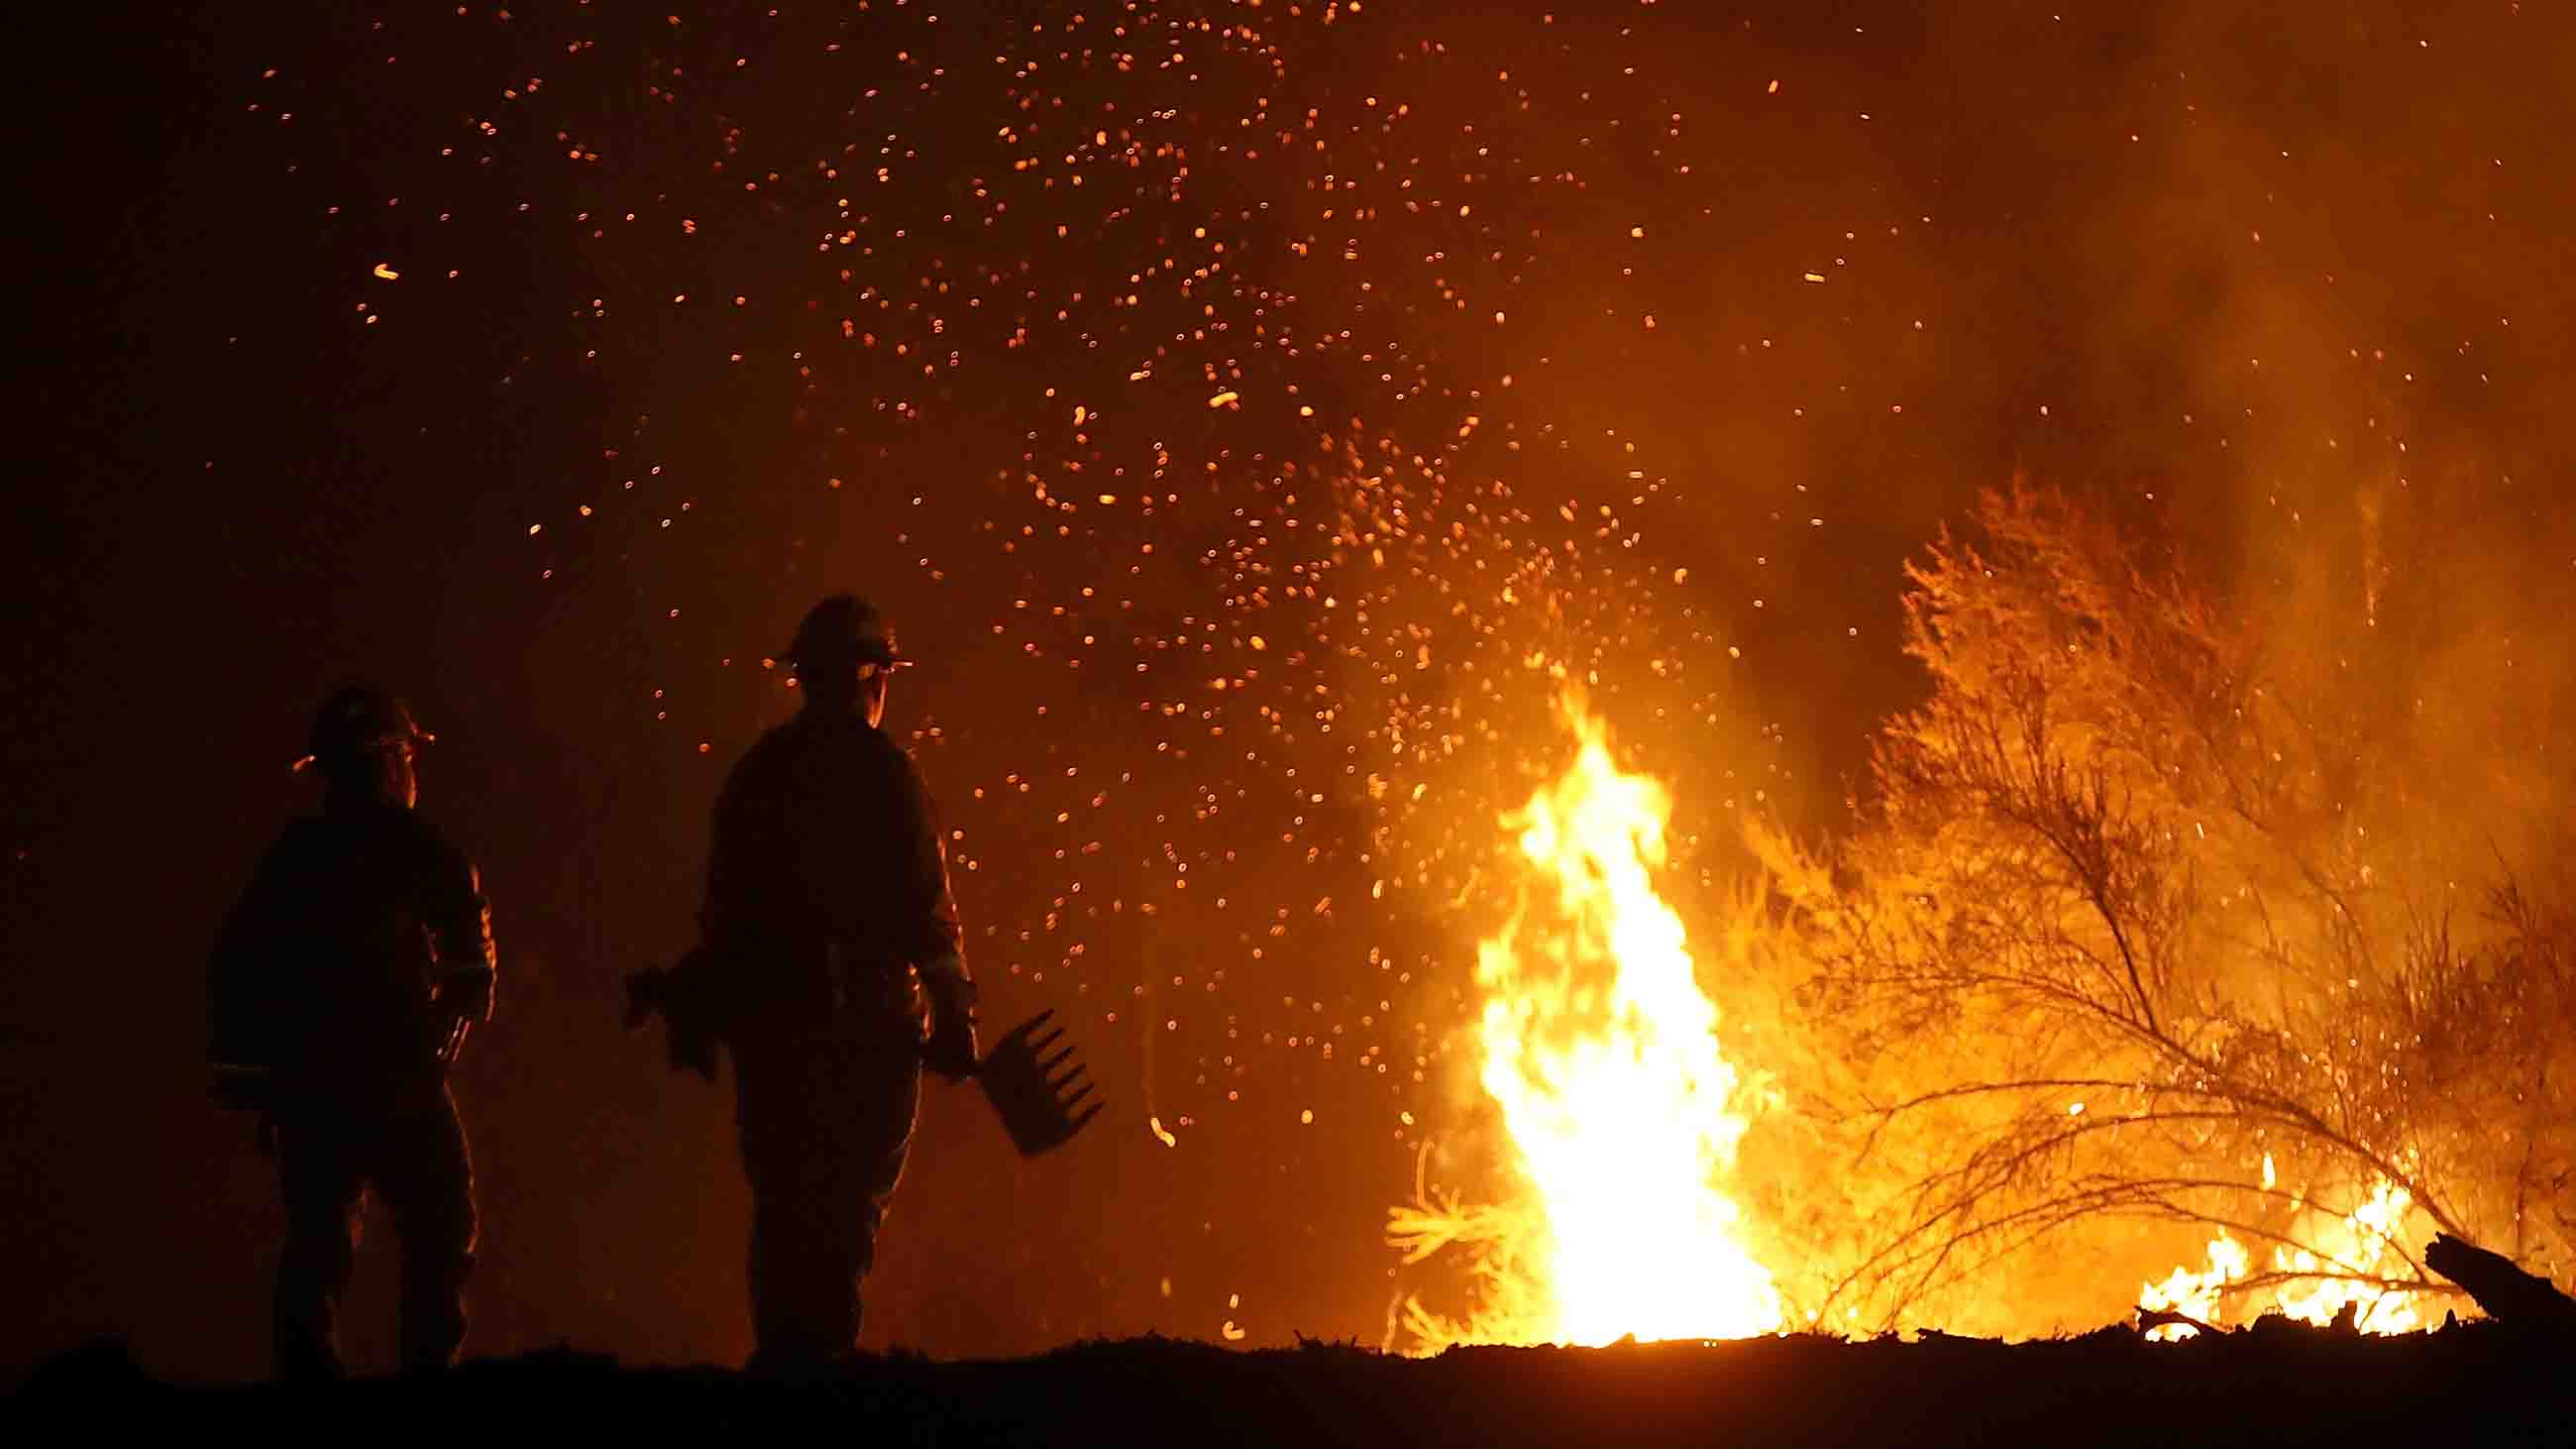 The Mendocino Complex Fire has been deemed the largest wildfire in California state history.